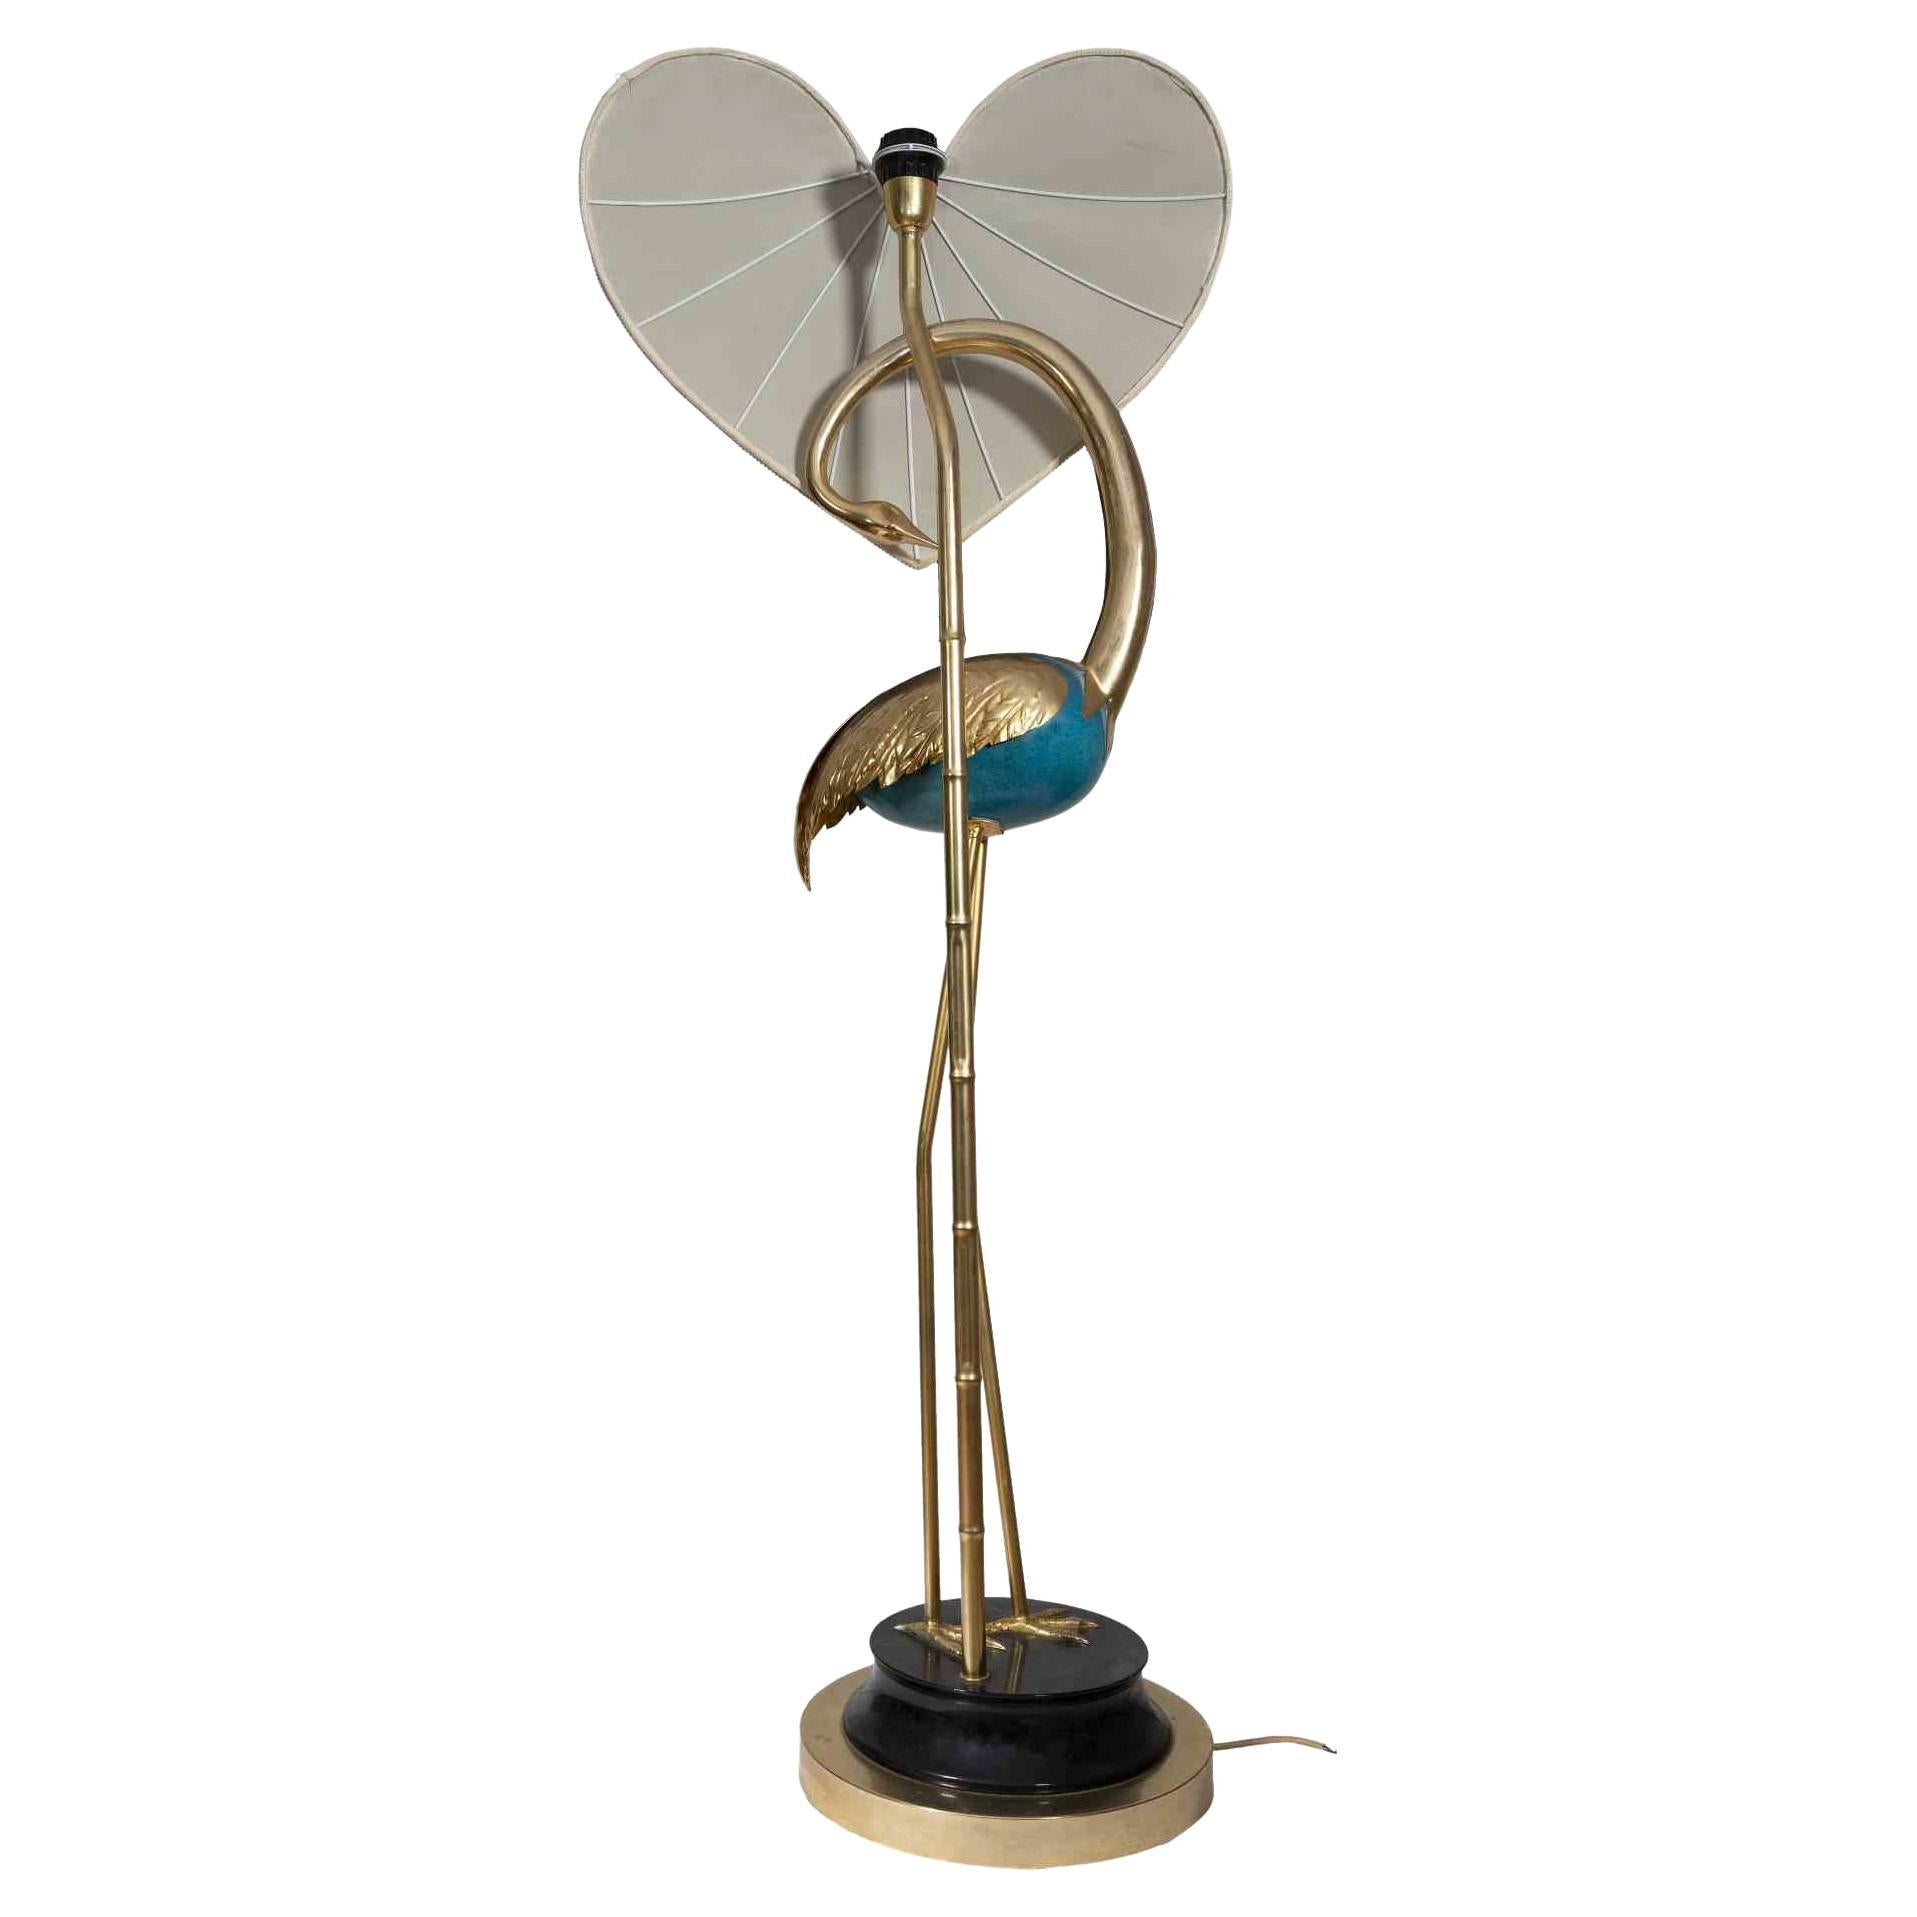 Vintage Flamingo Turquoise and Gold Lamp is a vintage design lamp realized by Antonio Pavia in Italy the 1970s.

Gold and turquise enameled brass Hollywood Regency Style. Lacquered wood and brass base. Requires regular up to 60 watt light bulbs. One